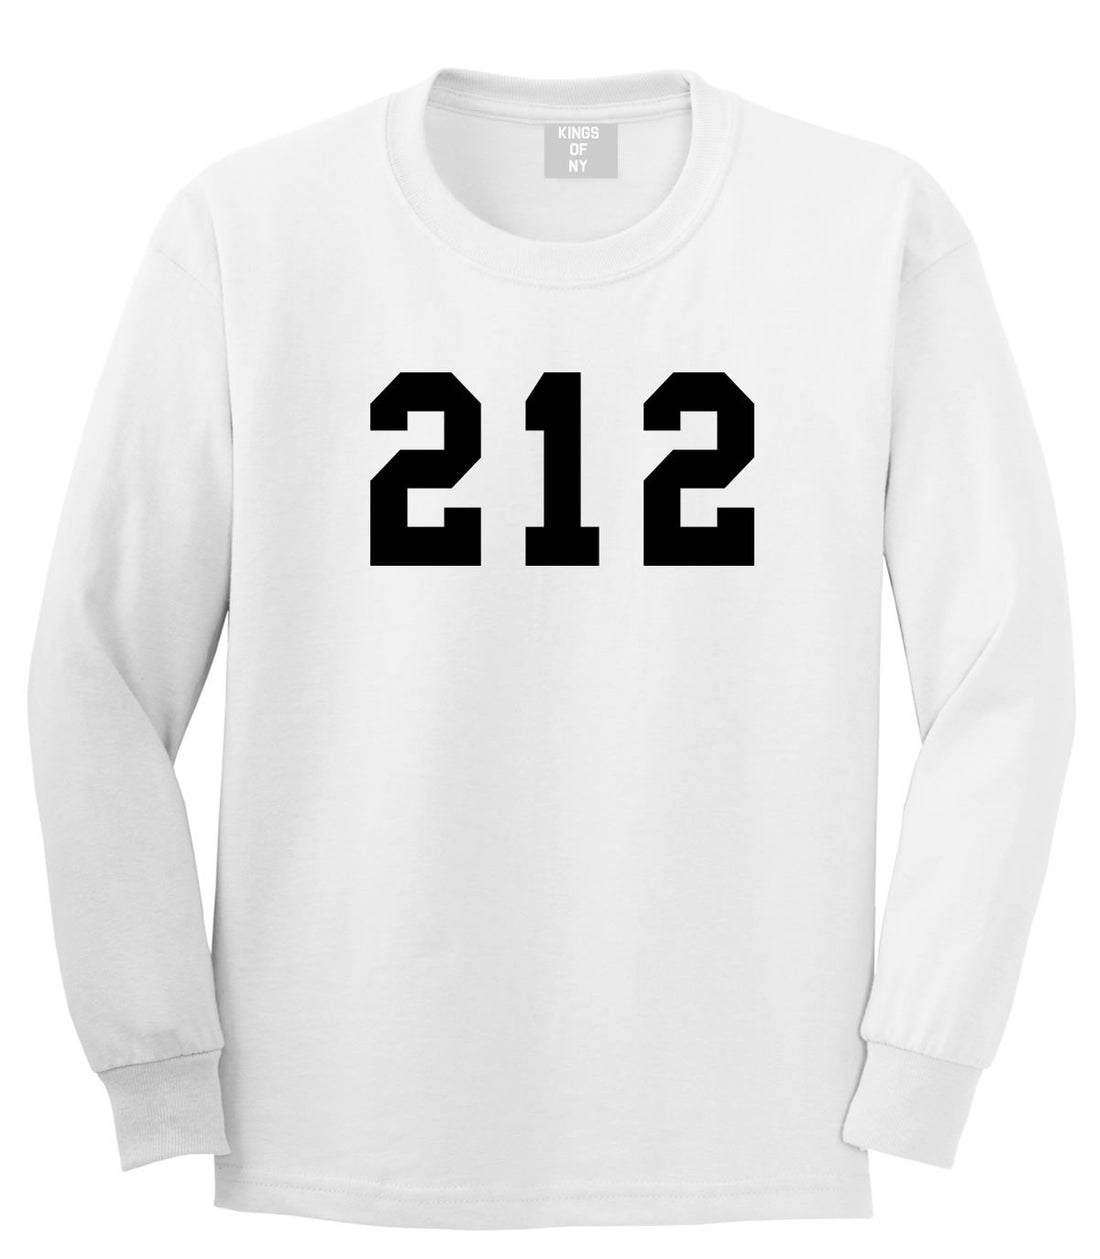 212 New York Area Code Long Sleeve T-Shirt in White By Kings Of NY